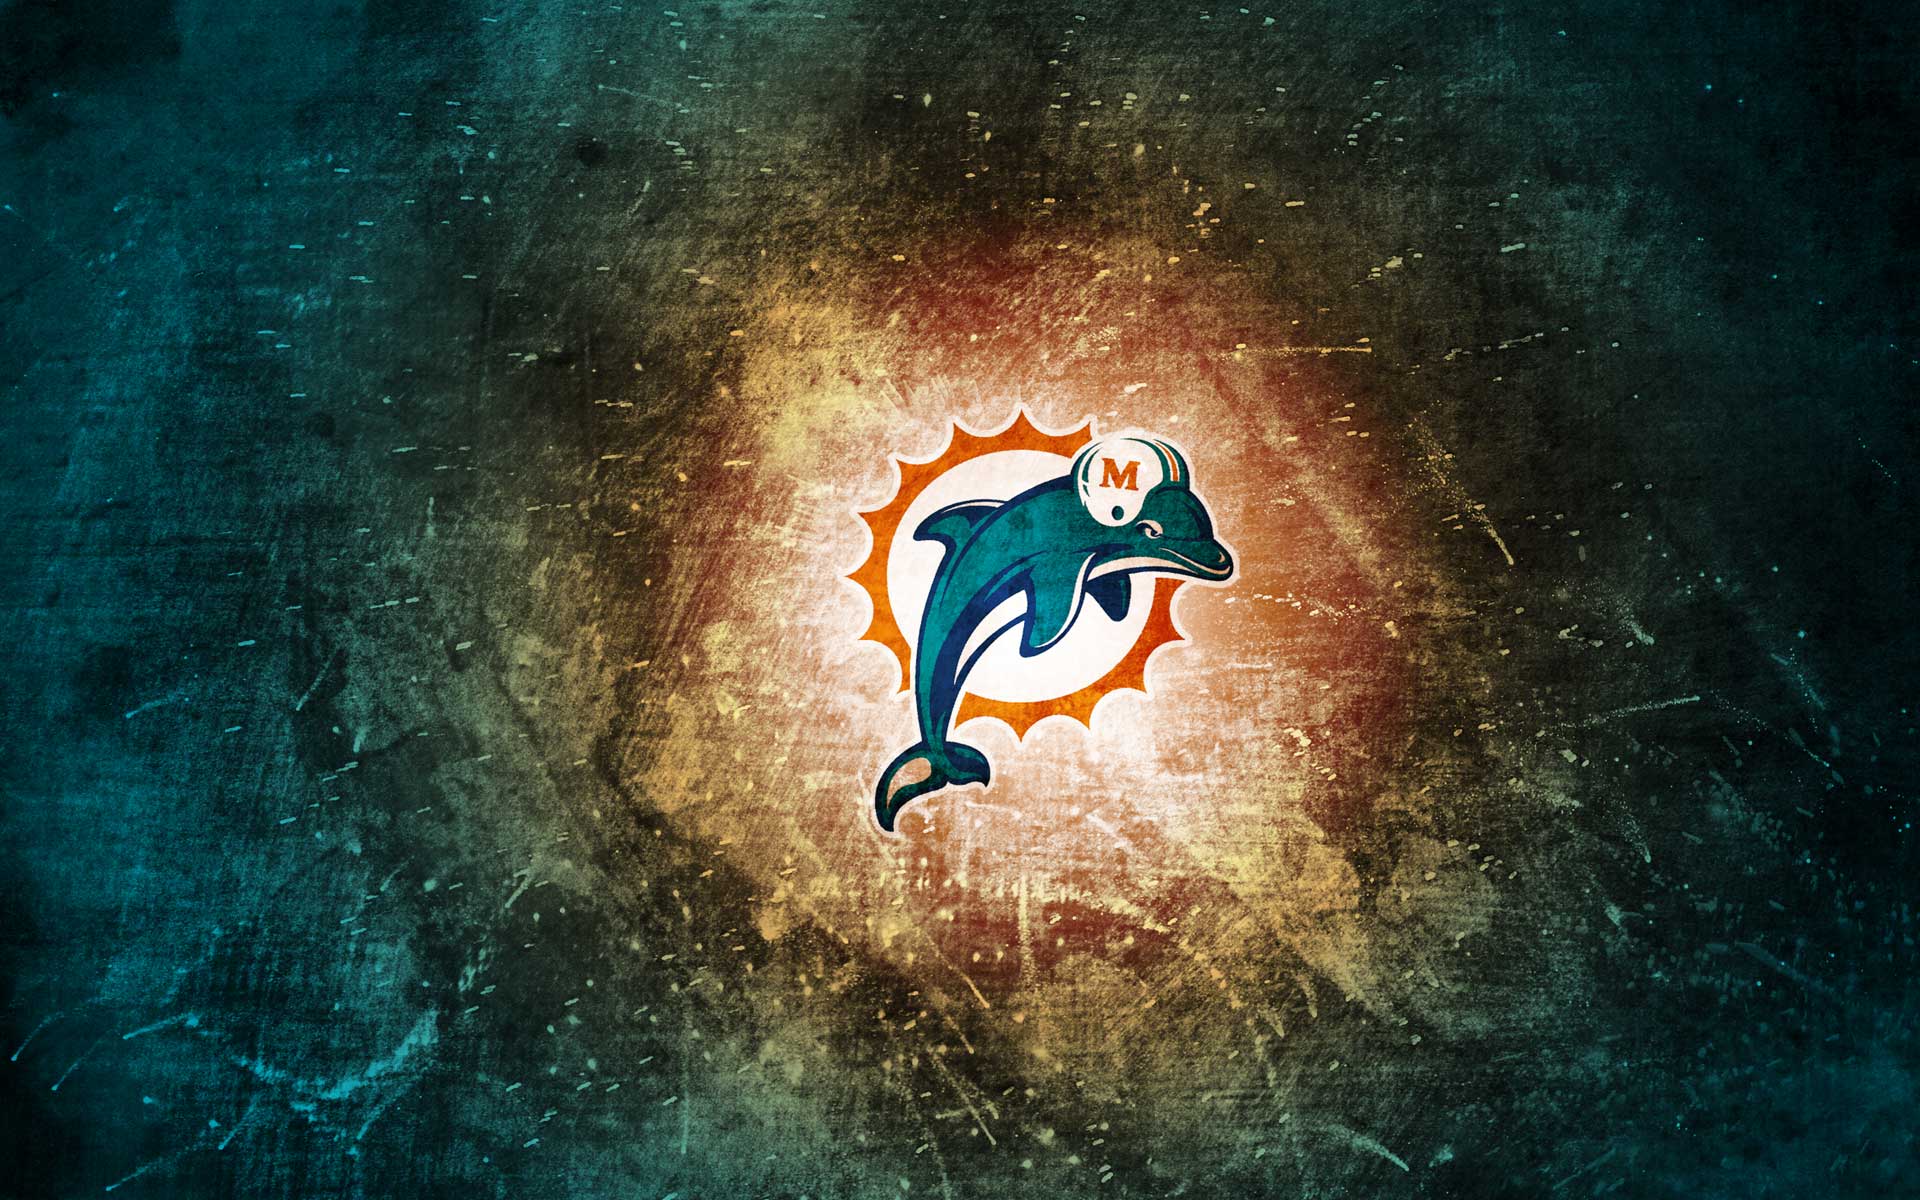 Miami Cool Logo - images logo miami dolphins windows wallpapers hd download free ...